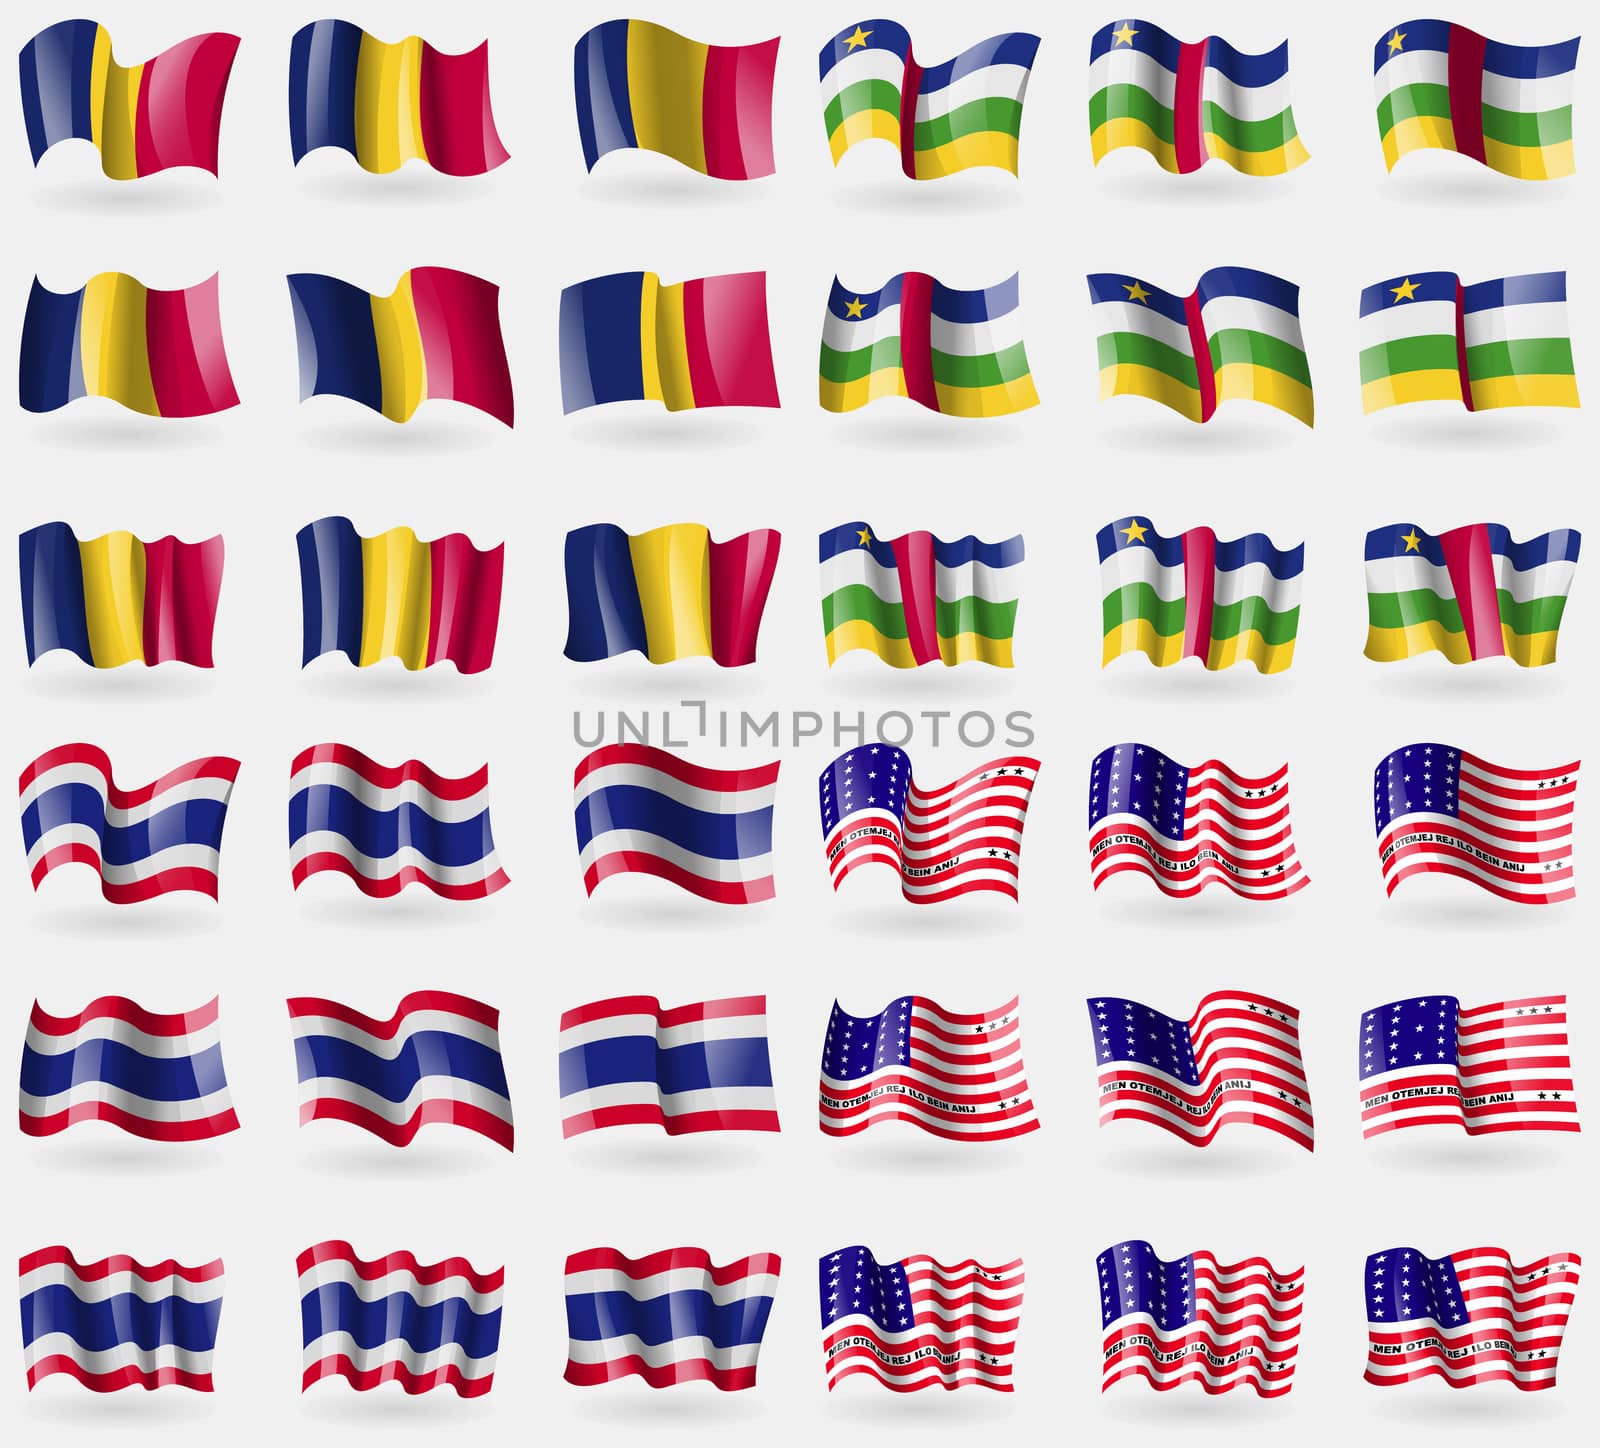 Chad, Central African Republic, Thailand, Bikini Atoll. Set of 36 flags of the countries of the world. illustration